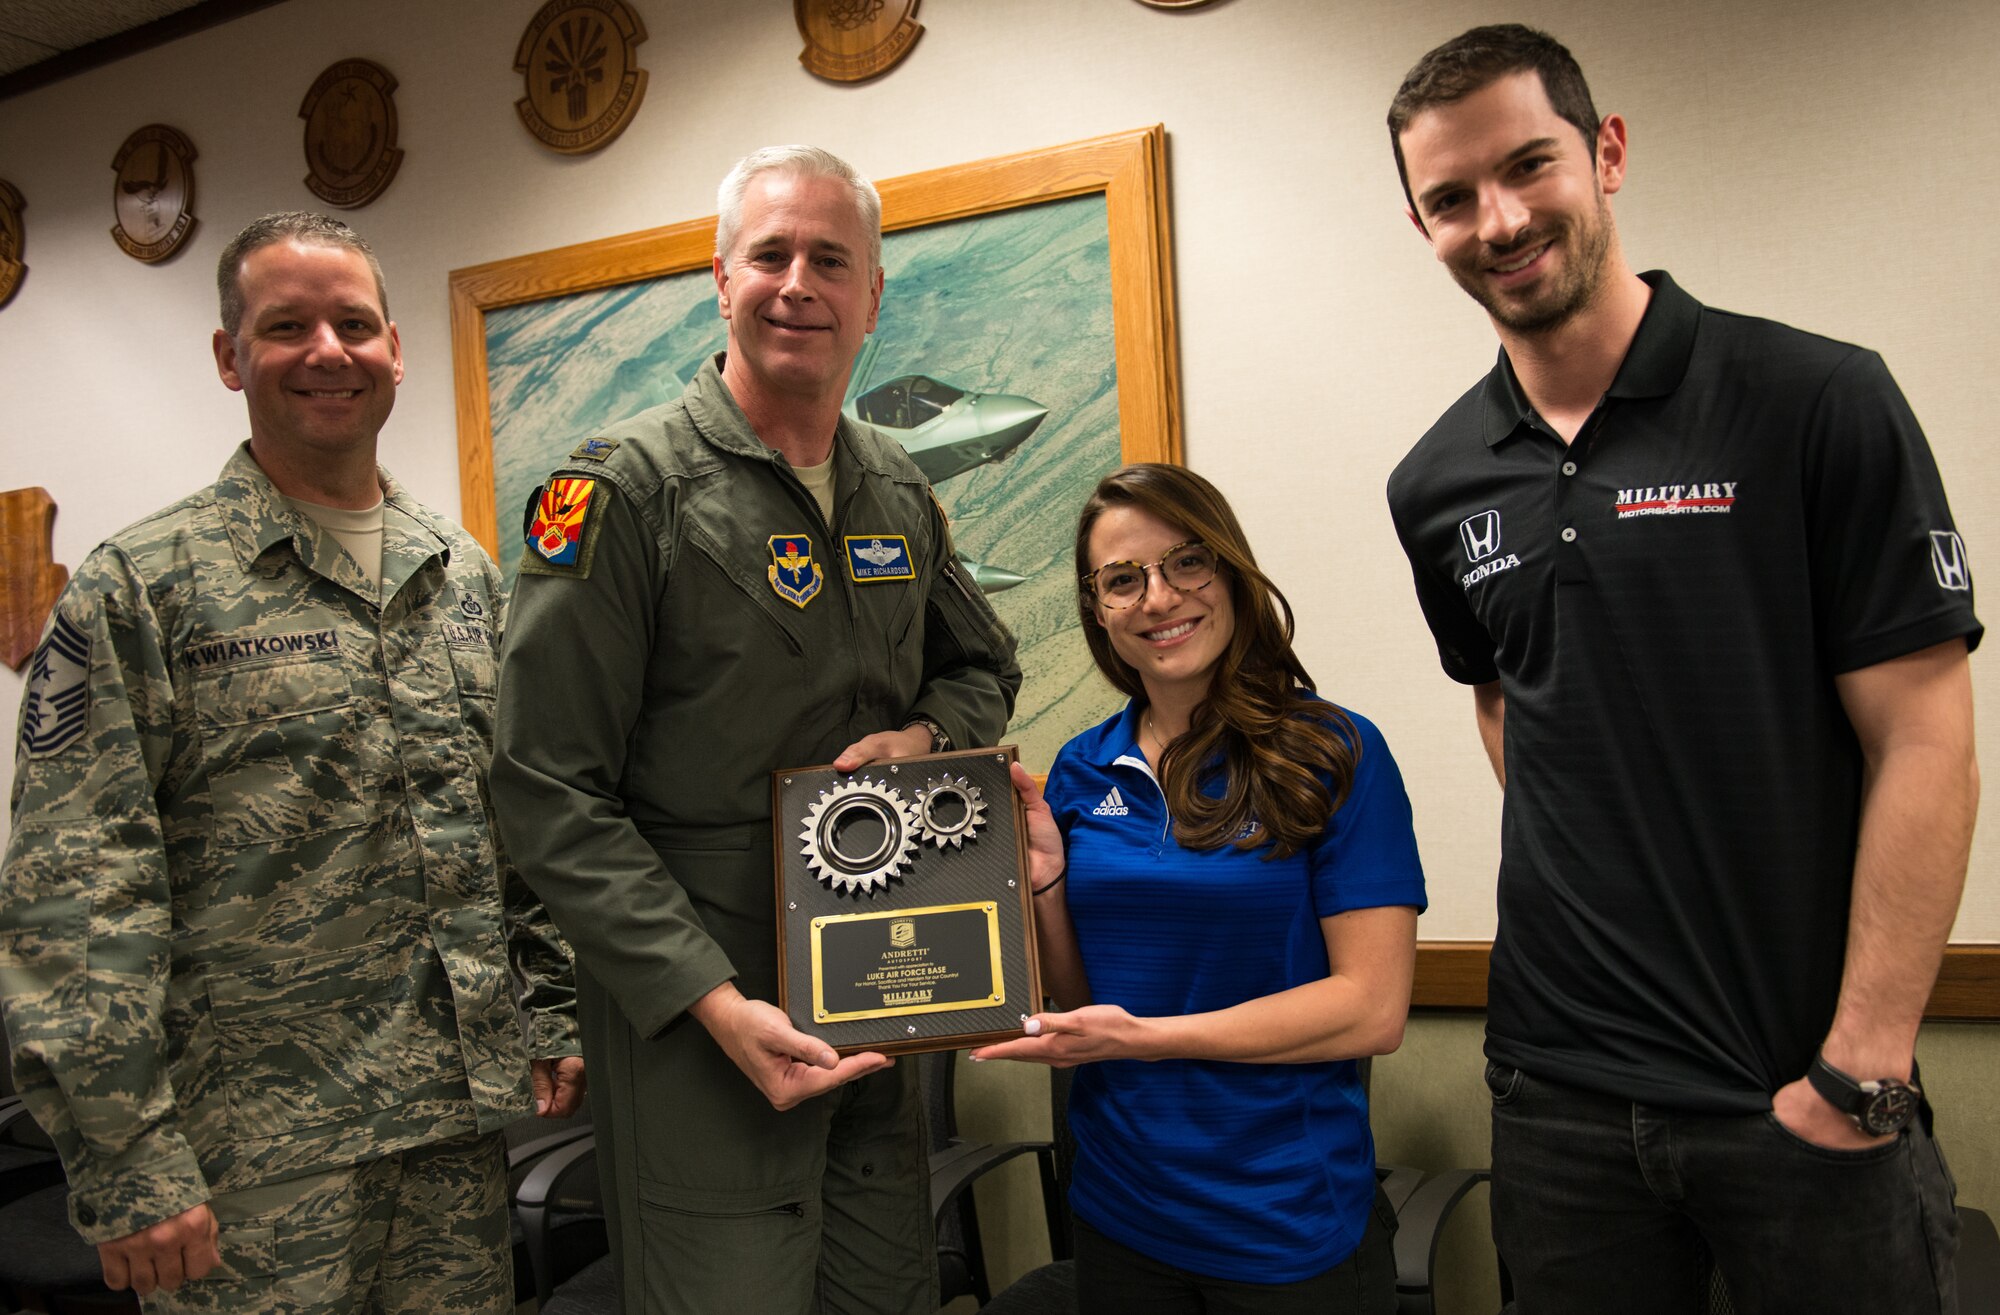 Col. Michael Richardson, 56th Fighter Wing vice commander, receives a gift of appreciation from the Andretti Autosport team at Luke Air Force Base, Ariz., April 5, 2018. The visit provided the Andretti Autosport team insight on the mission of Luke and its Airmen. (U.S. Air Force photo by Airman 1st Class Alexander Cook)